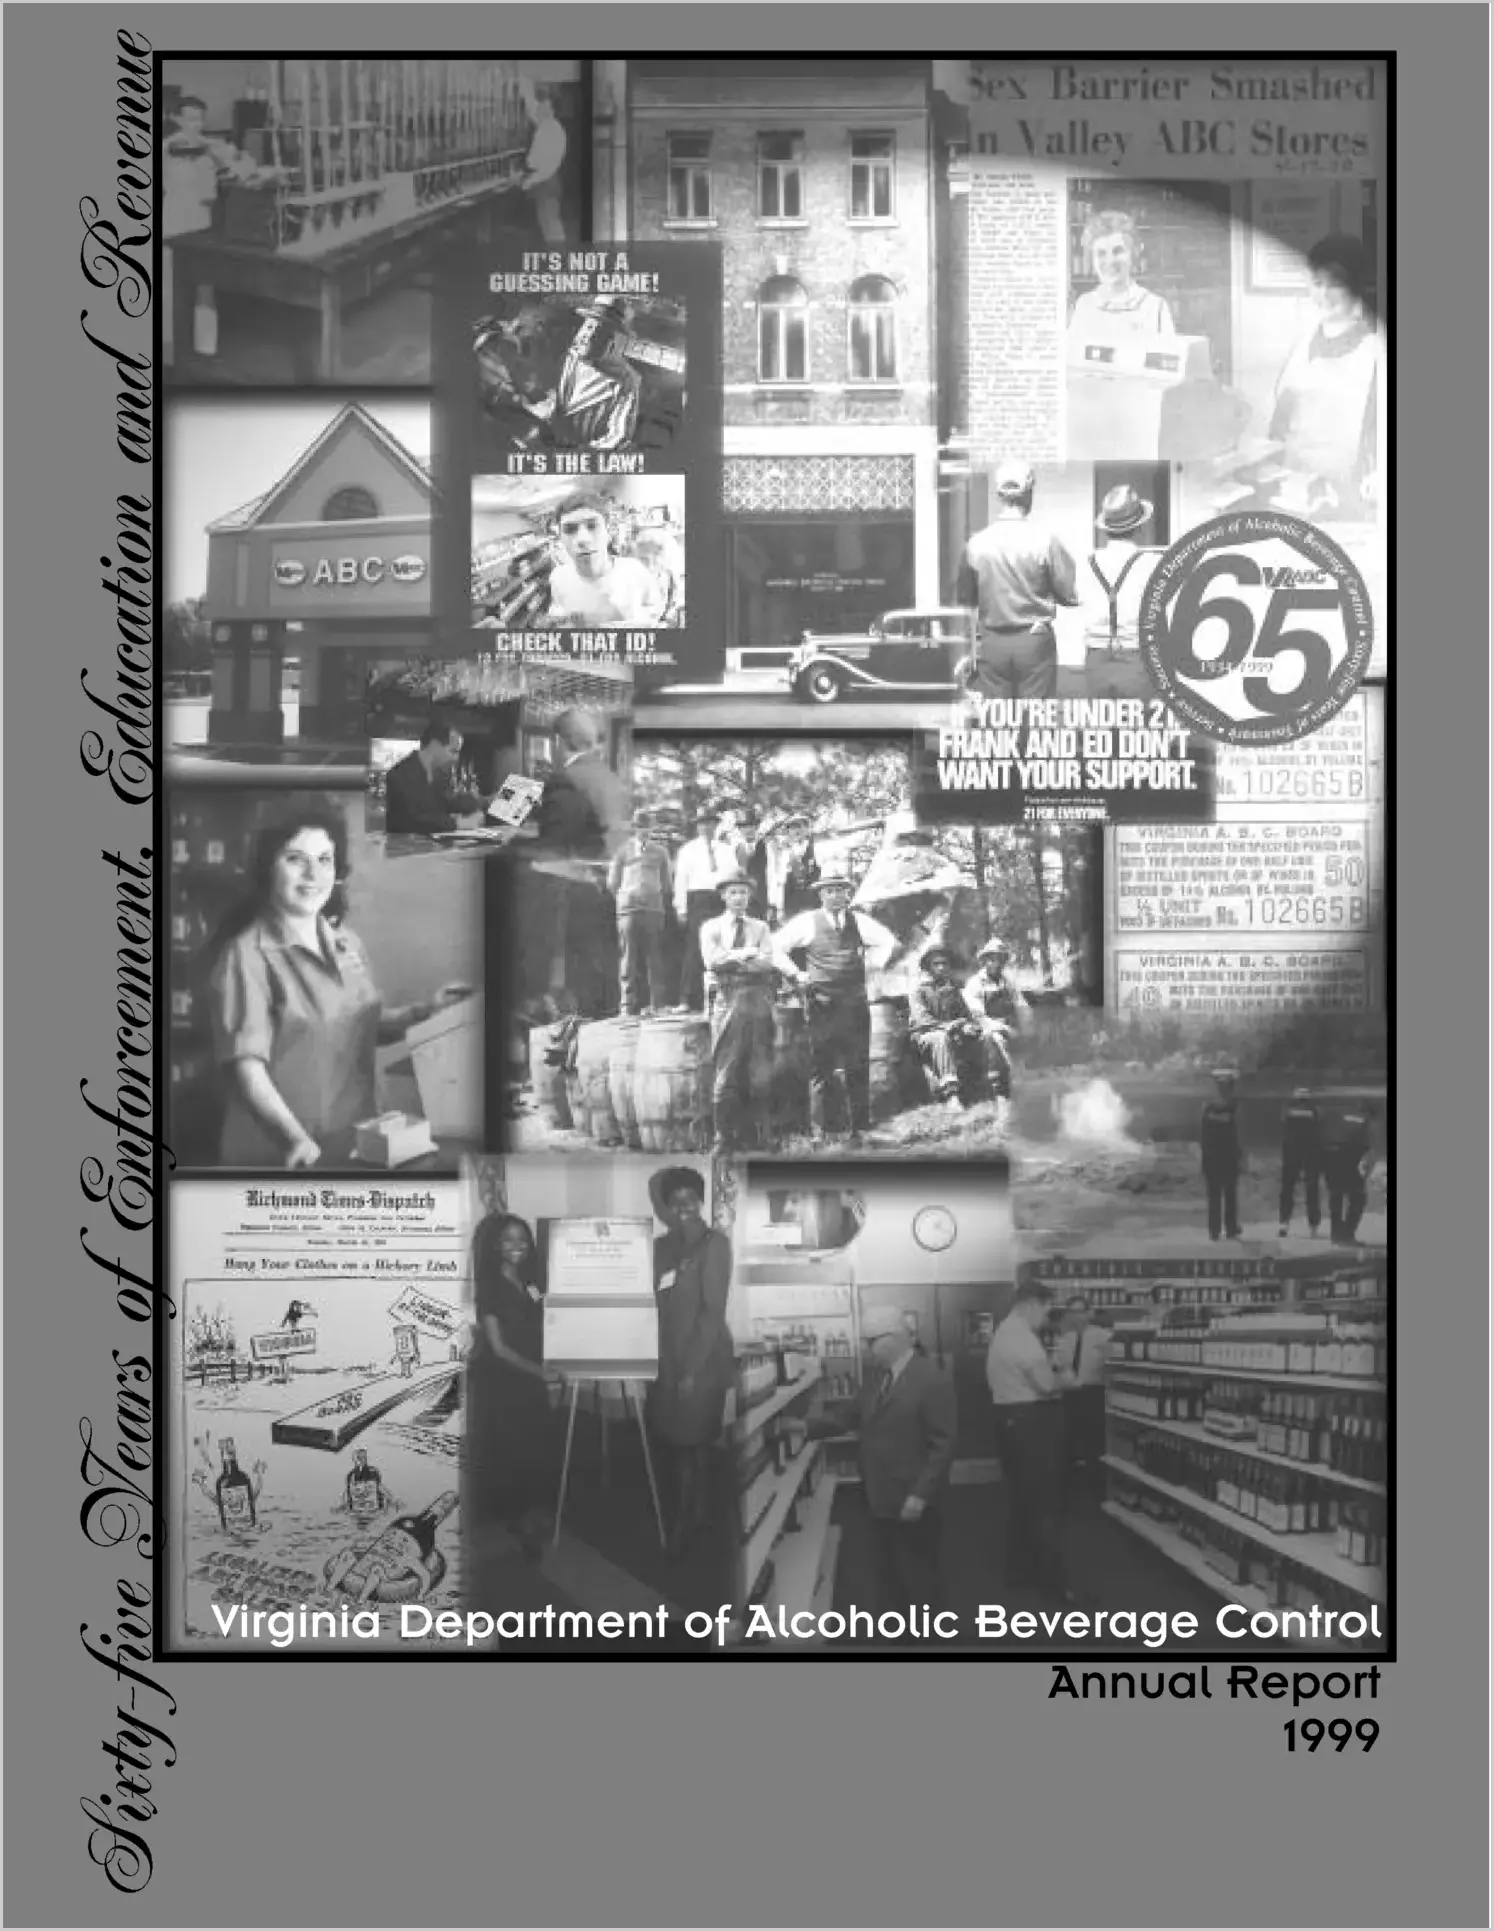 Department of Alcoholic Beverage Control Annual Report 1999